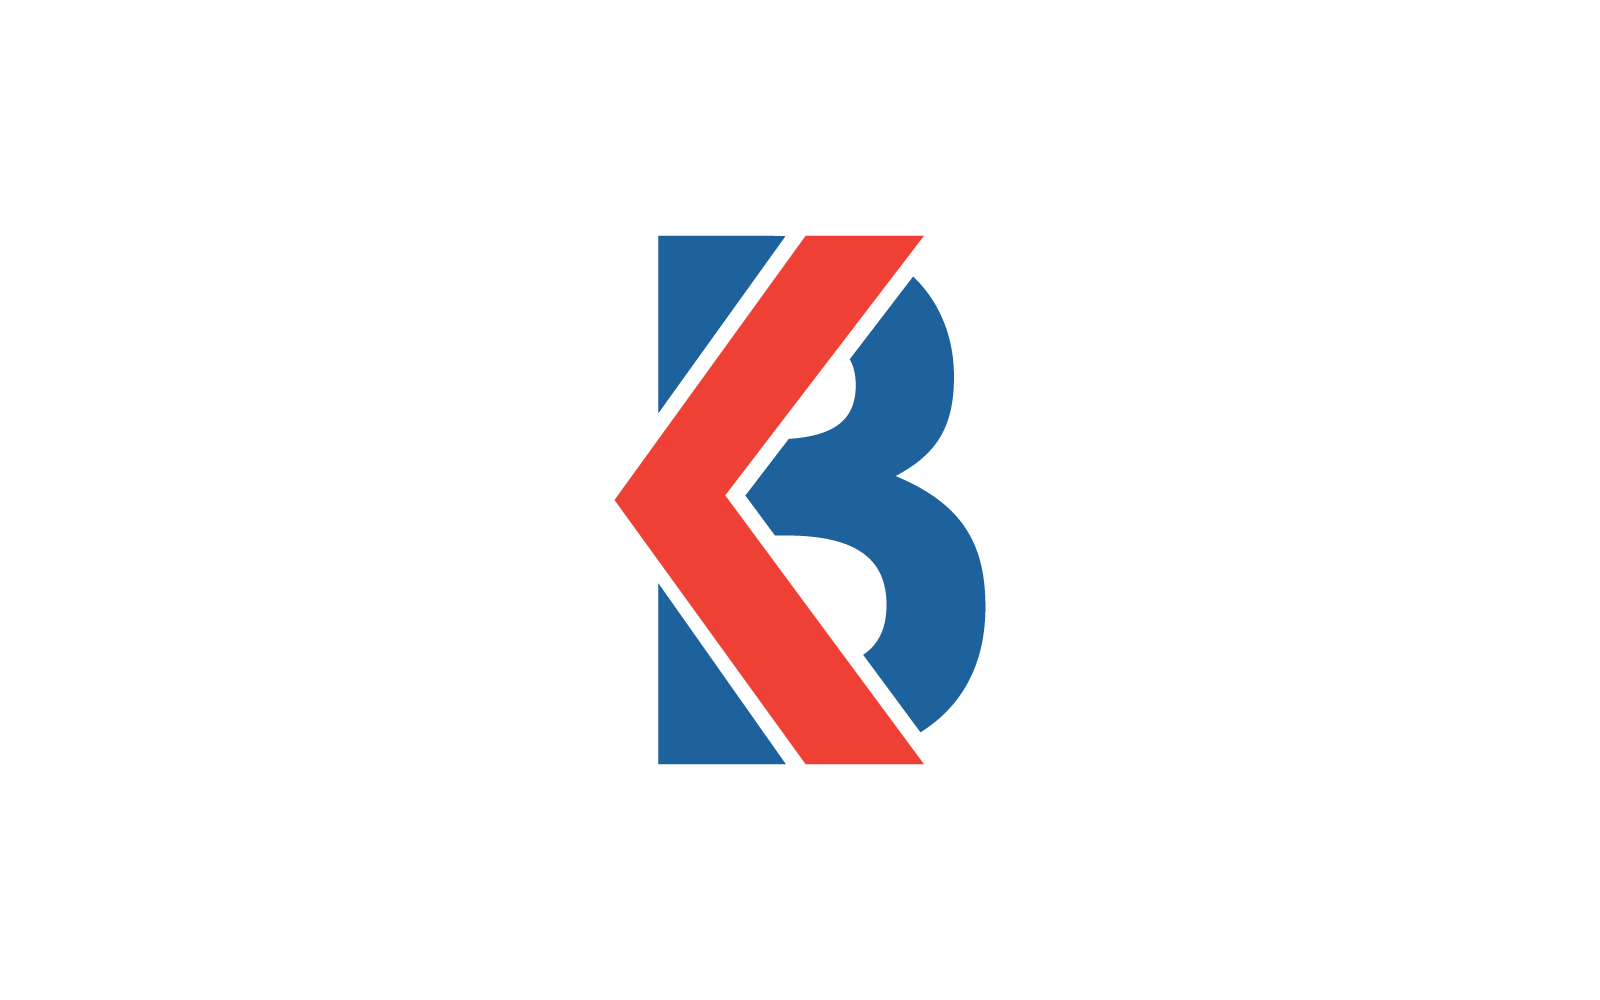 B initial with arrow ilustration logo template